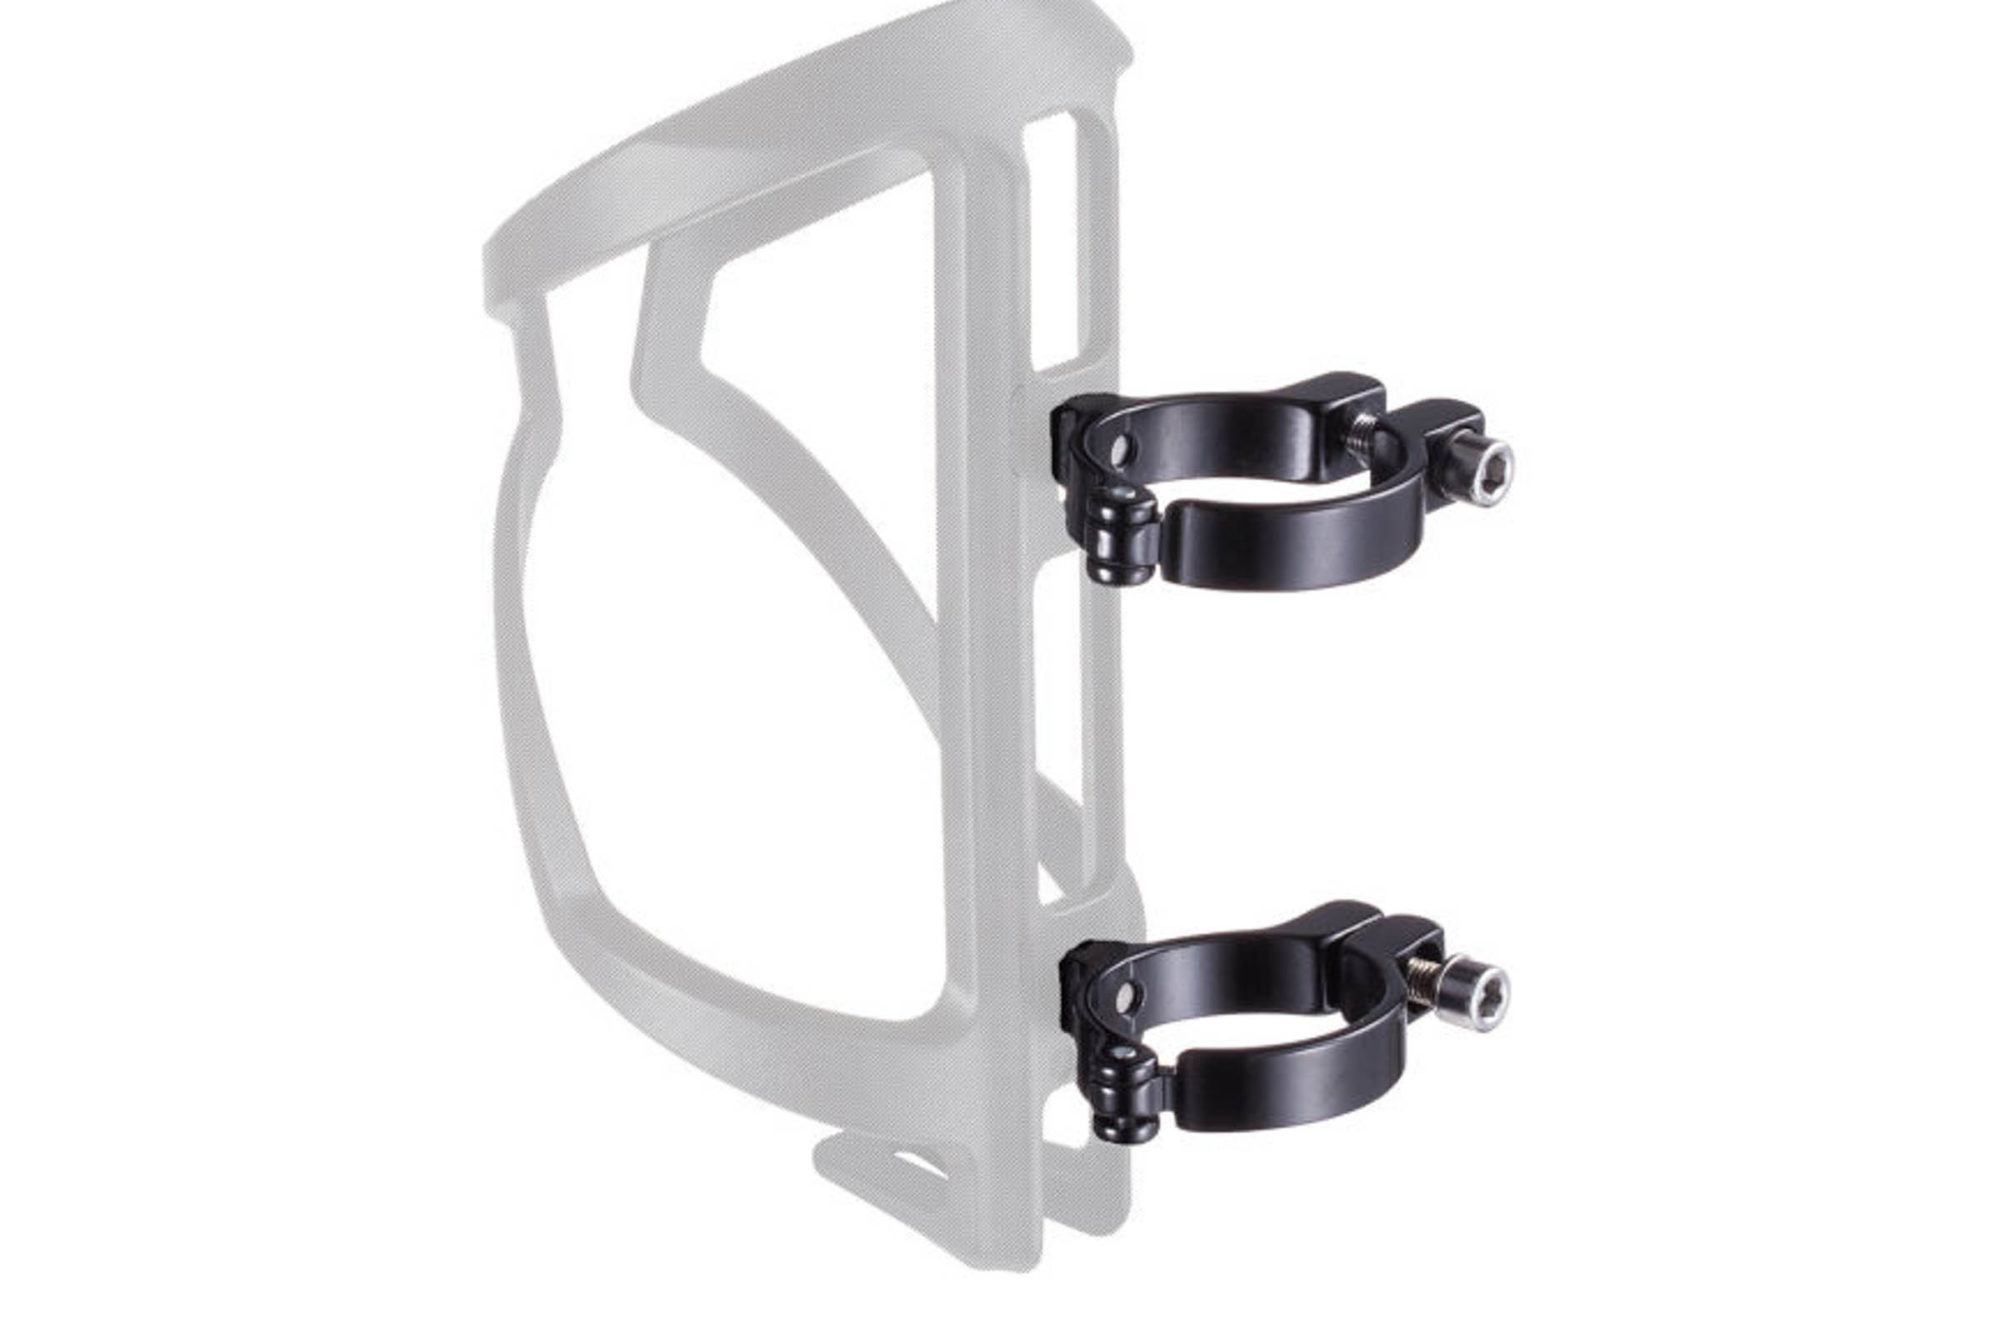 Giant Bottle Cage Adapter